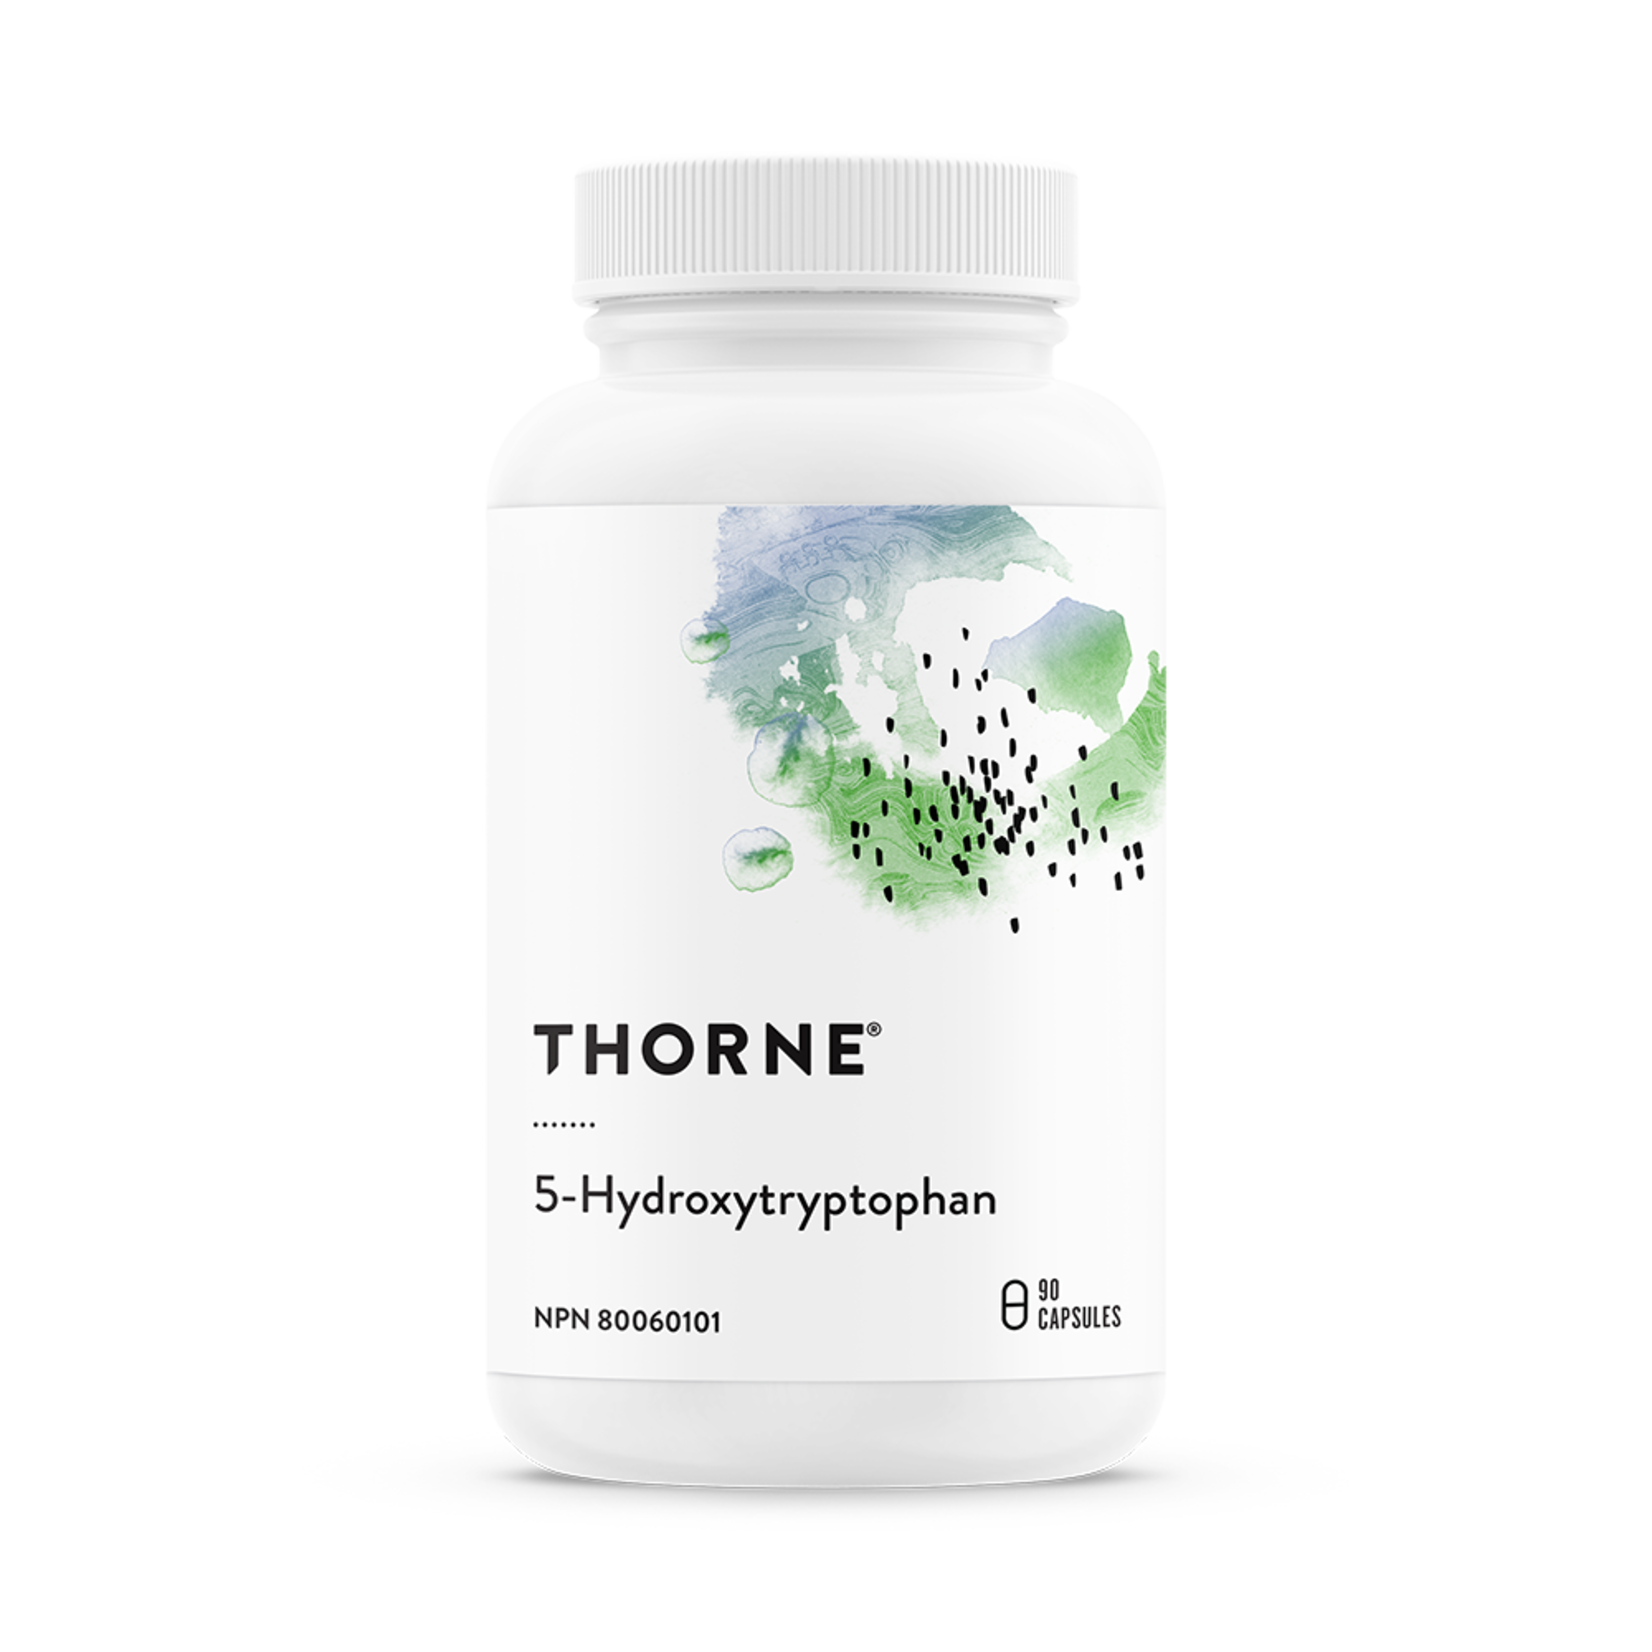 THORNE RESEARCH THORNE 5-Hydroxytryptophan 90 VEGICAPS (FORMERLY GRIFFONIA )